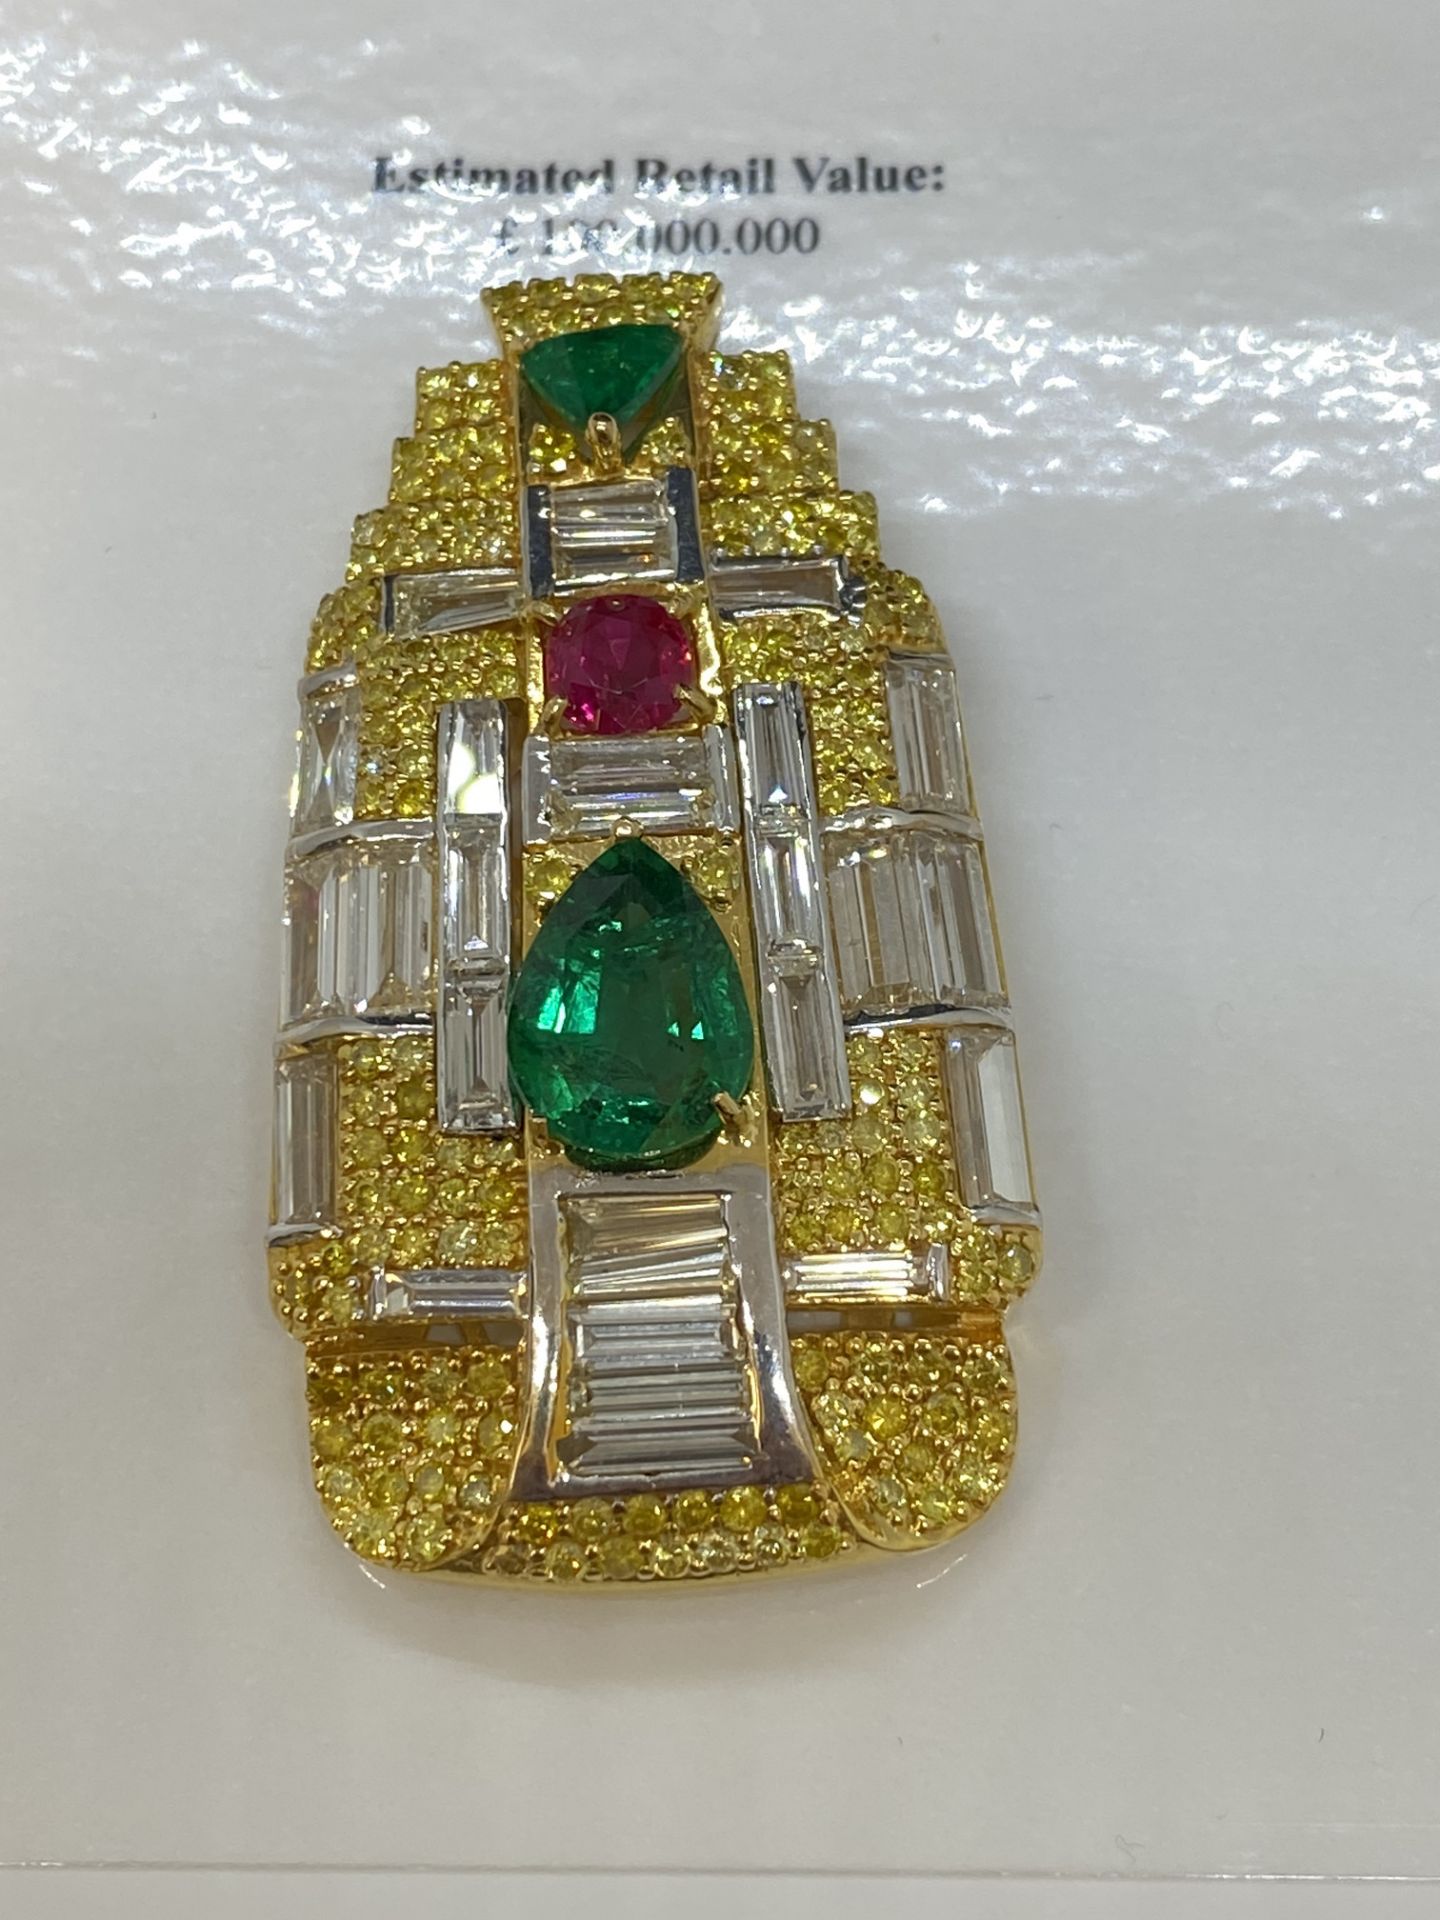 FINE DIAMOND, EMERALD & RUBY PENDANT WITH W.G.I £100,000 VALUATION - 30.9 GRAMS ** MUST SEE ** - Image 15 of 25